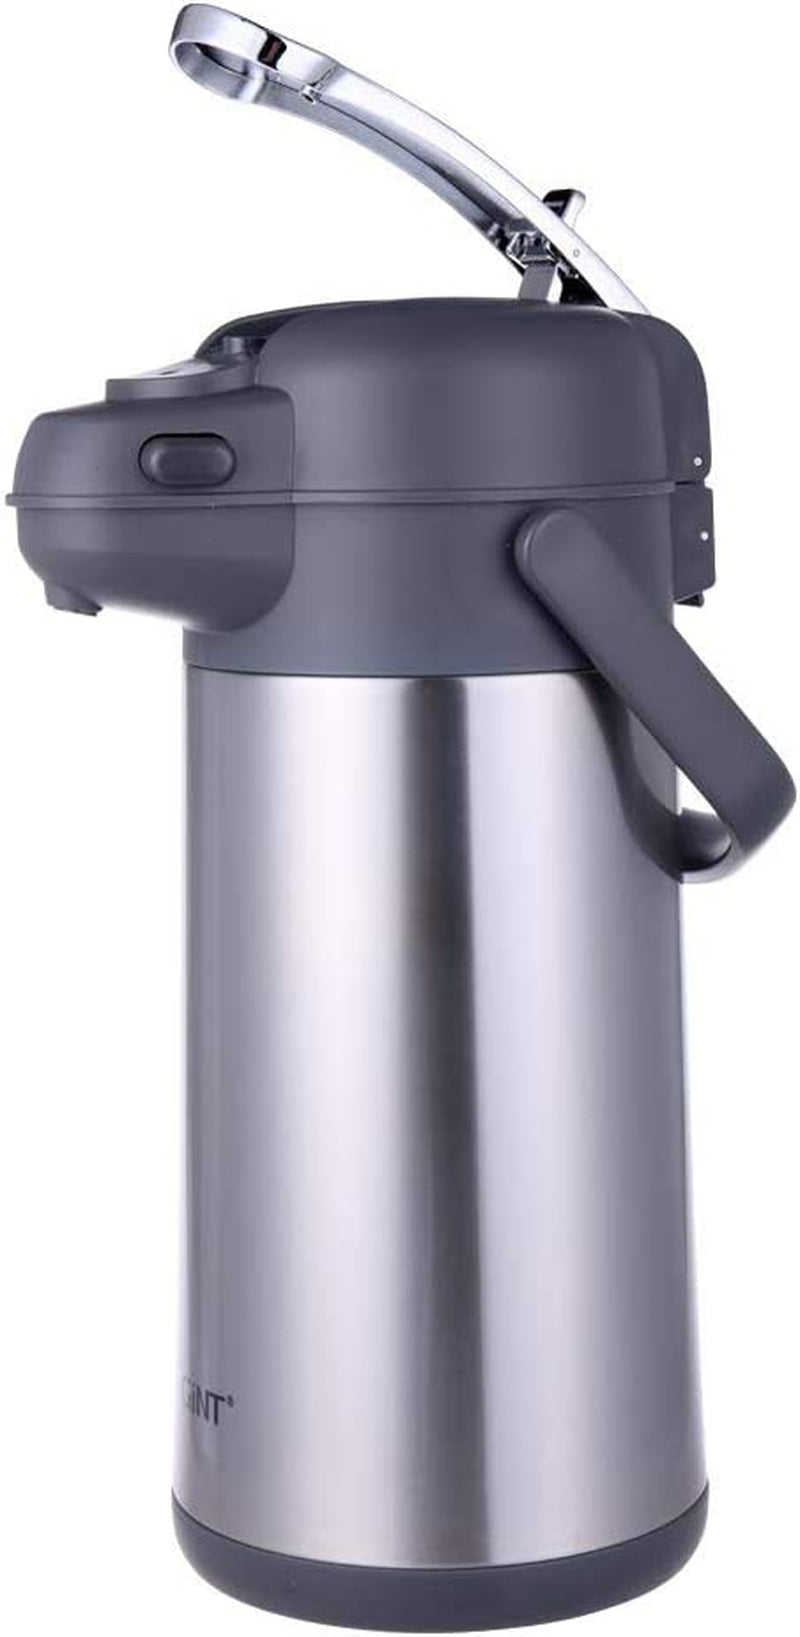 101 Oz Stainless Steel Thermal Carafe Dispenser with Pump, Vacuum Insulated Lever-Action Airpots for Hot/Cold Coffee Retention, 3L Capacity